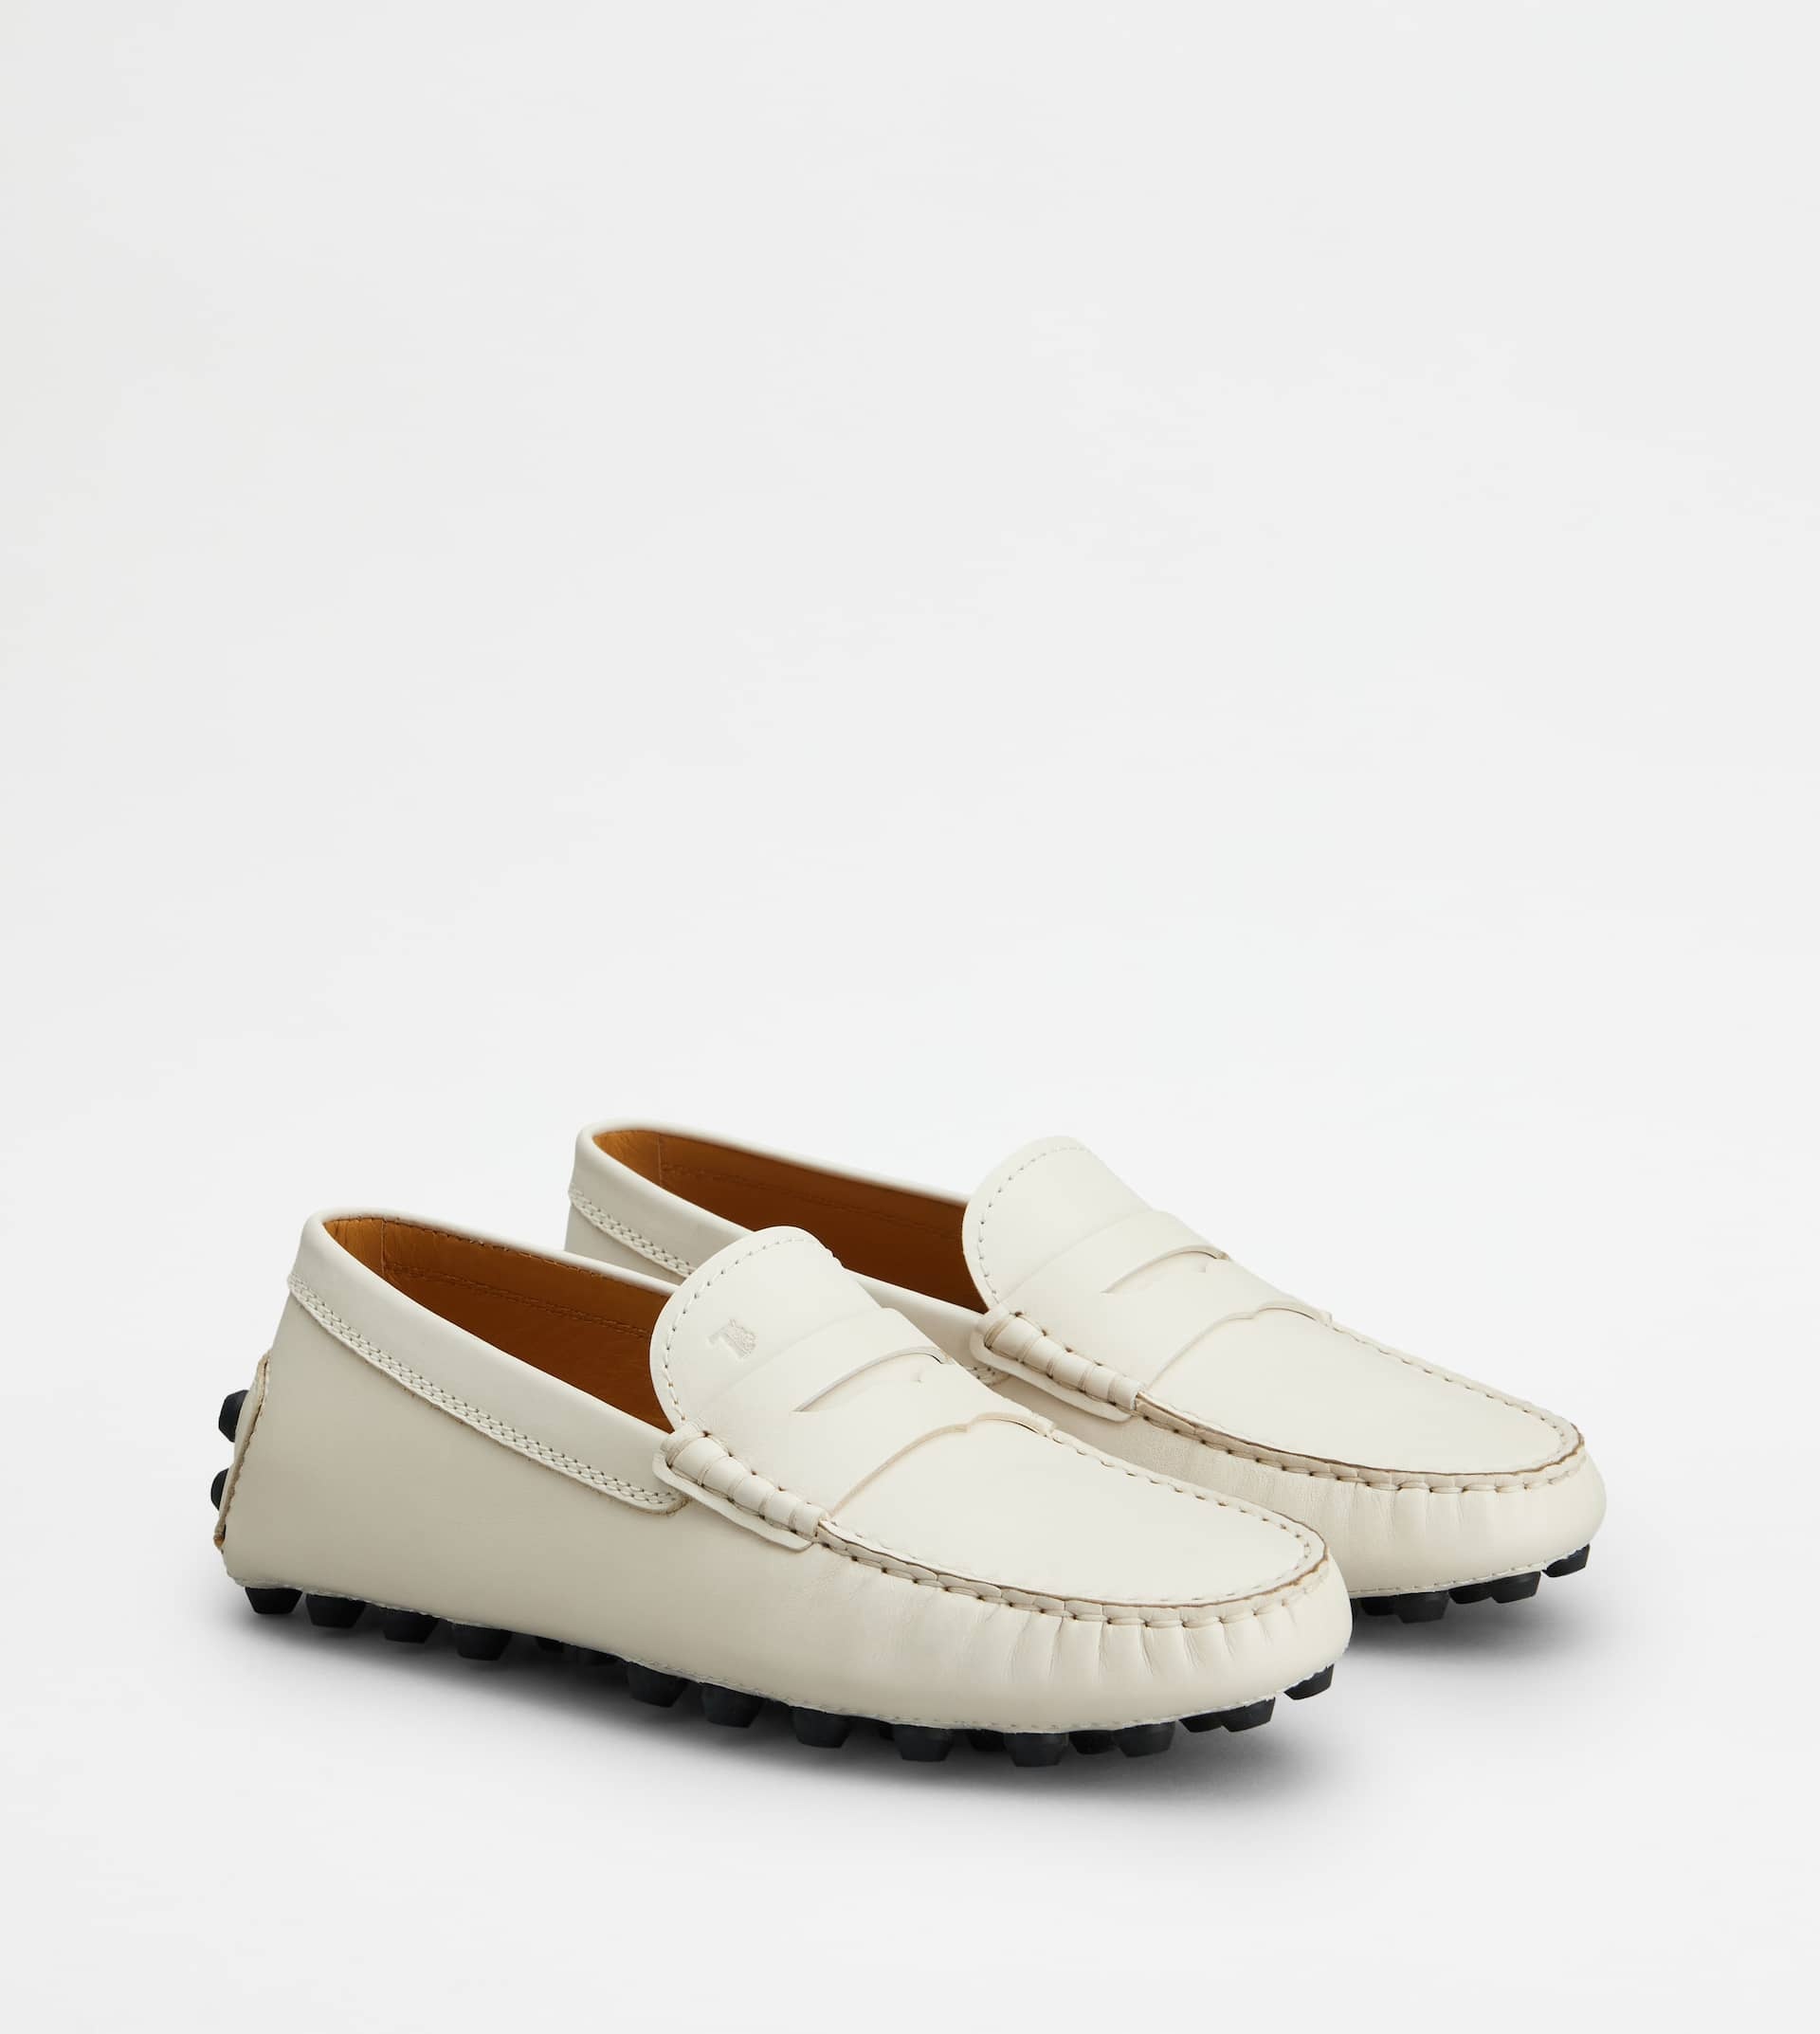 TOD'S GOMMINO BUBBLE IN LEATHER - OFF WHITE, BLACK - 3